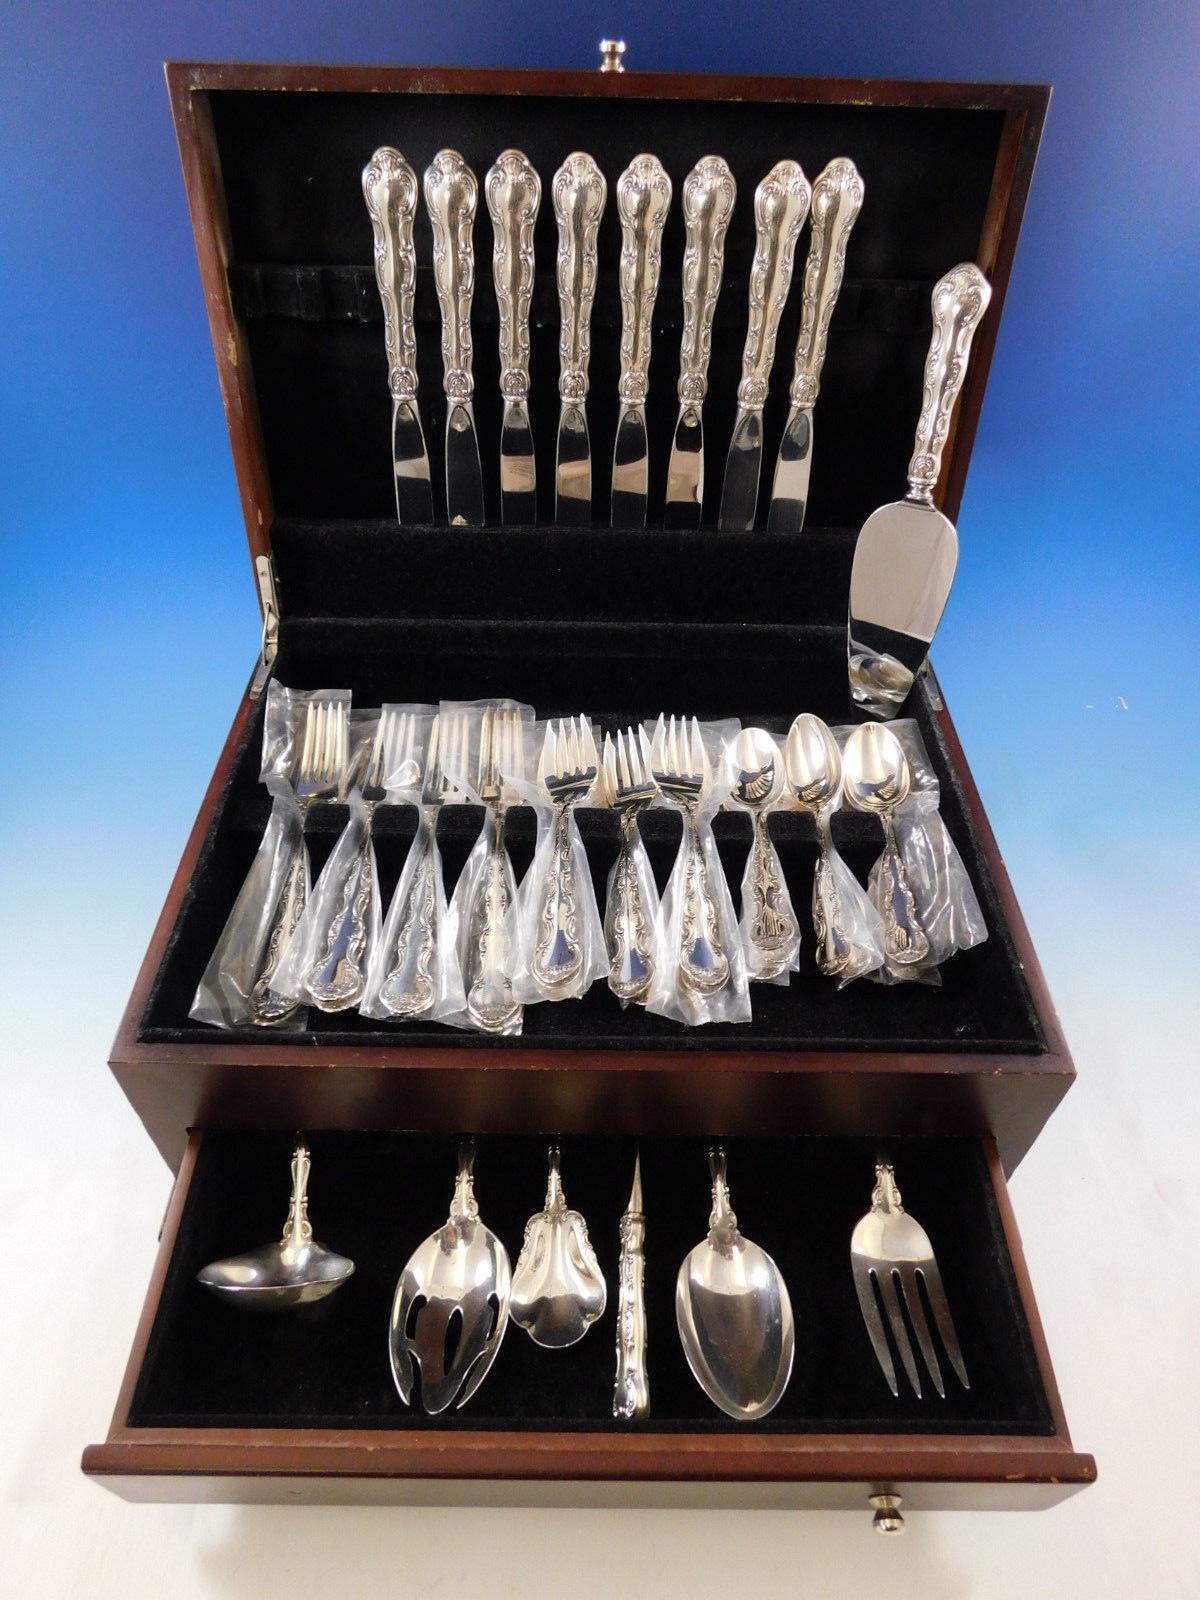 Strasbourg by Gorham sterling silver place size flatware set of 39 pieces. This set includes:

8 place size knives, 9 1/4